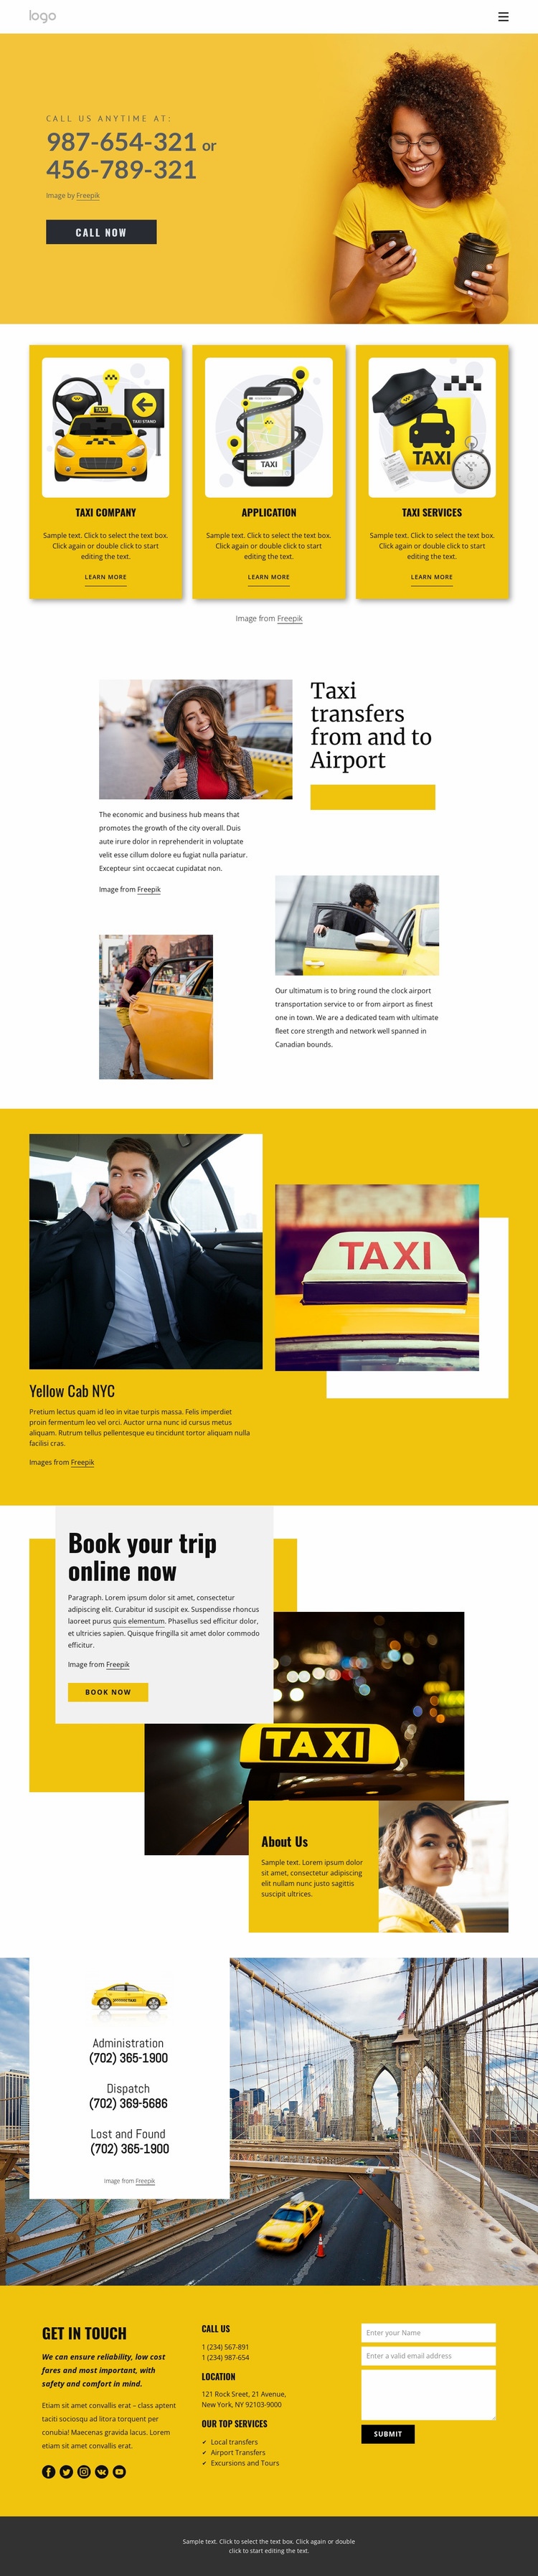 Quality taxi service Elementor Template Alternative